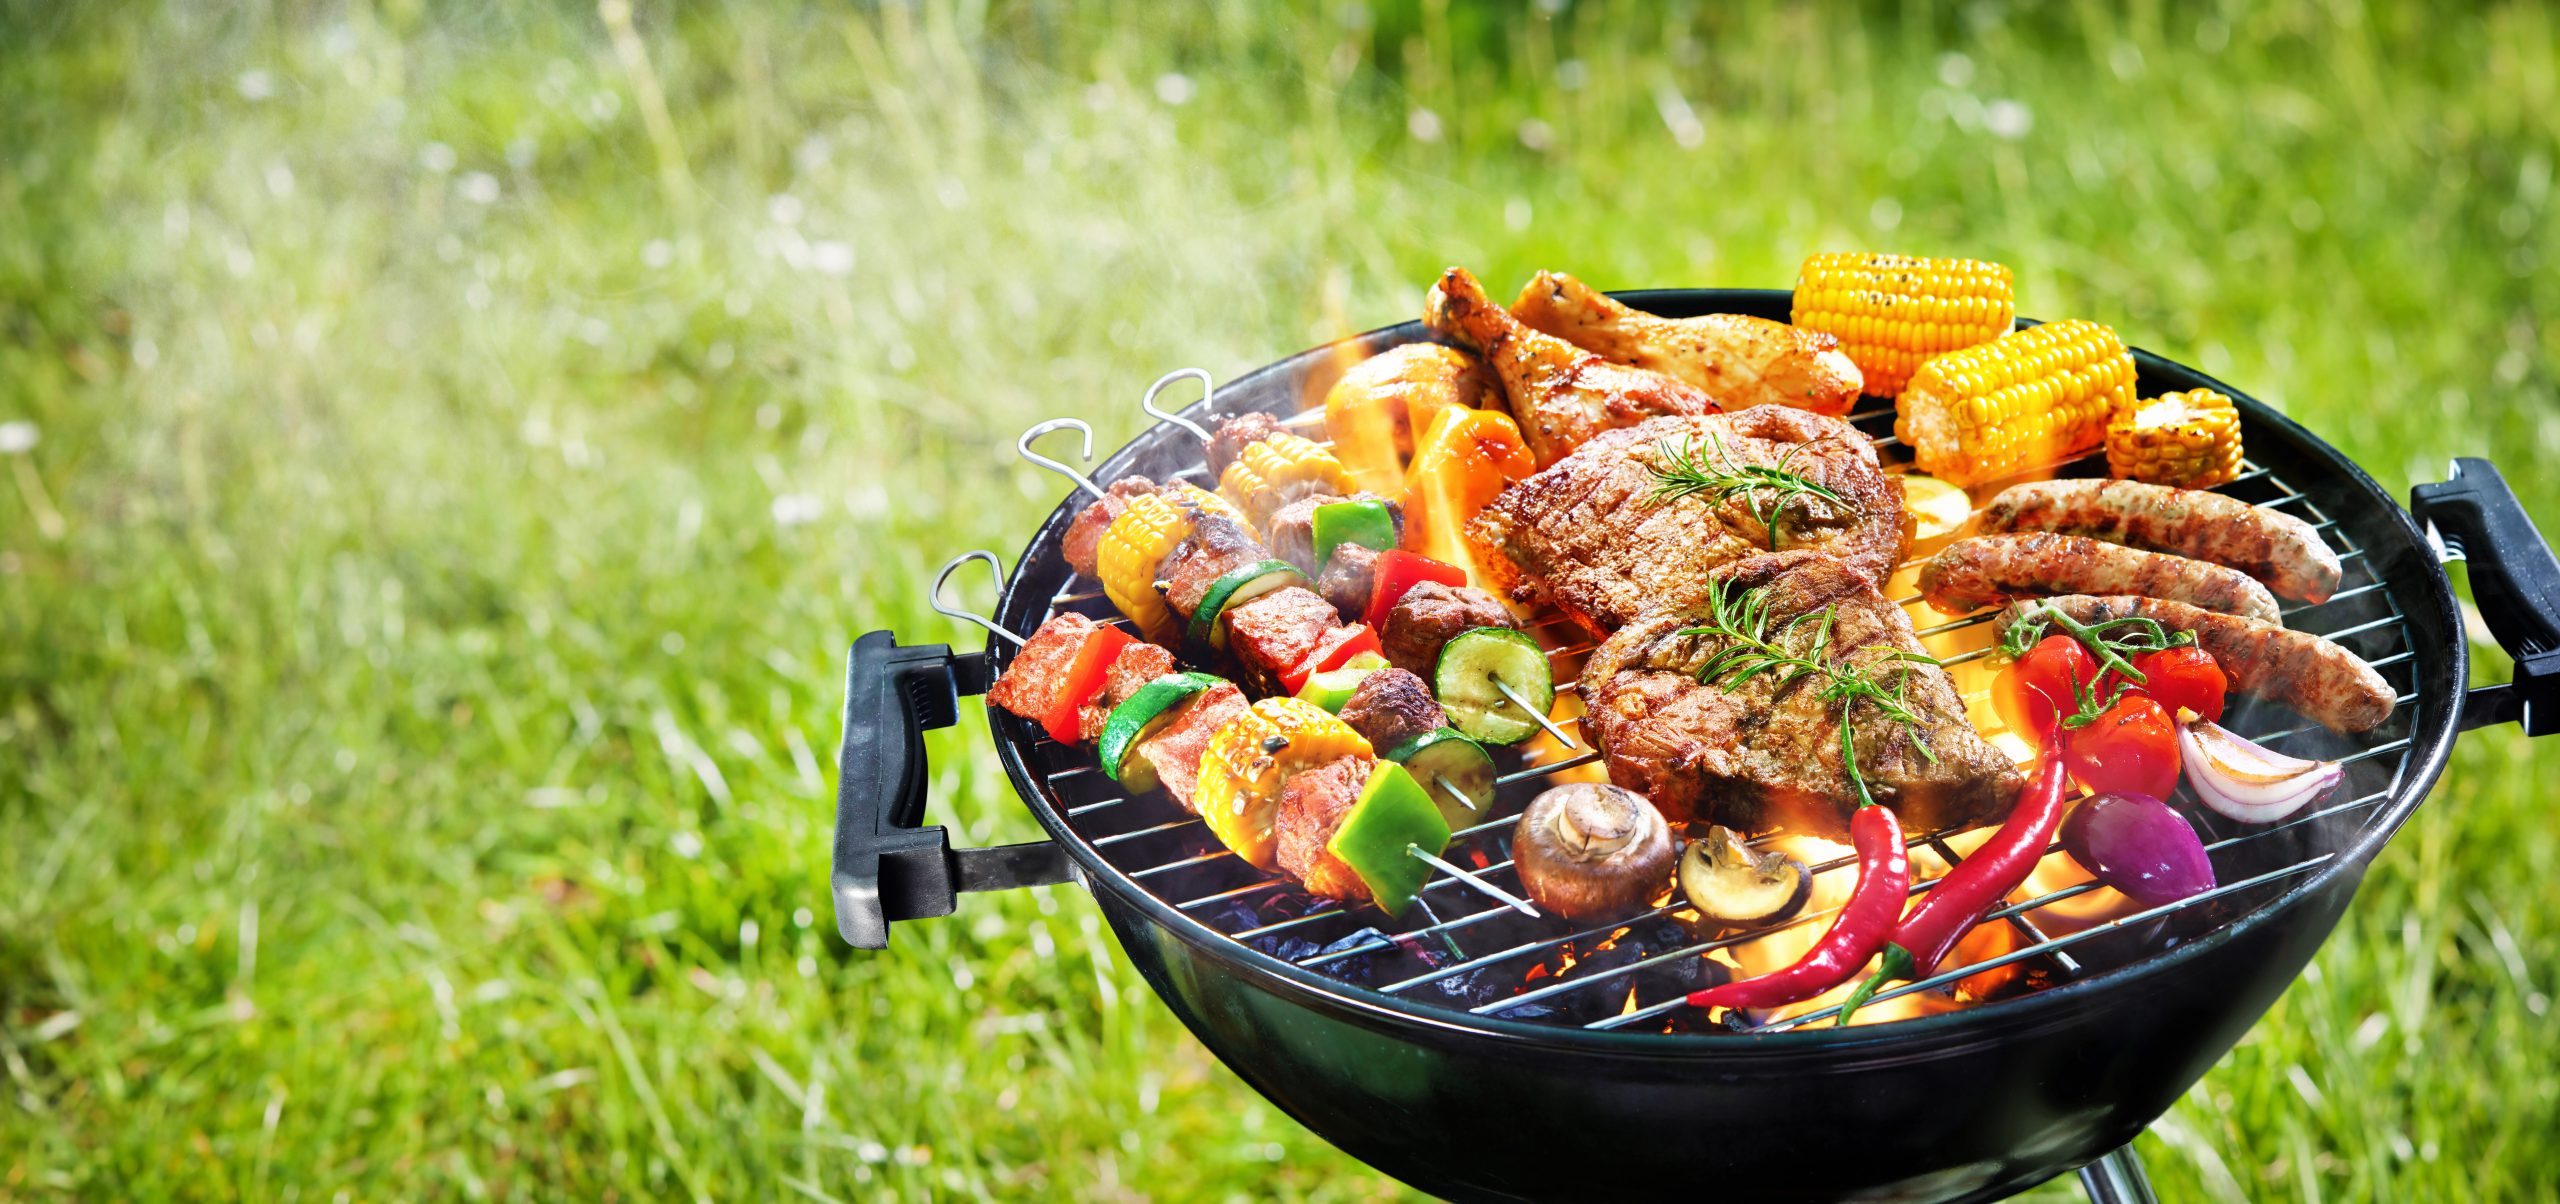 Outdoor Cooking 101: A Guide to Gas, Charcoal, Smoker, and Electric Grills